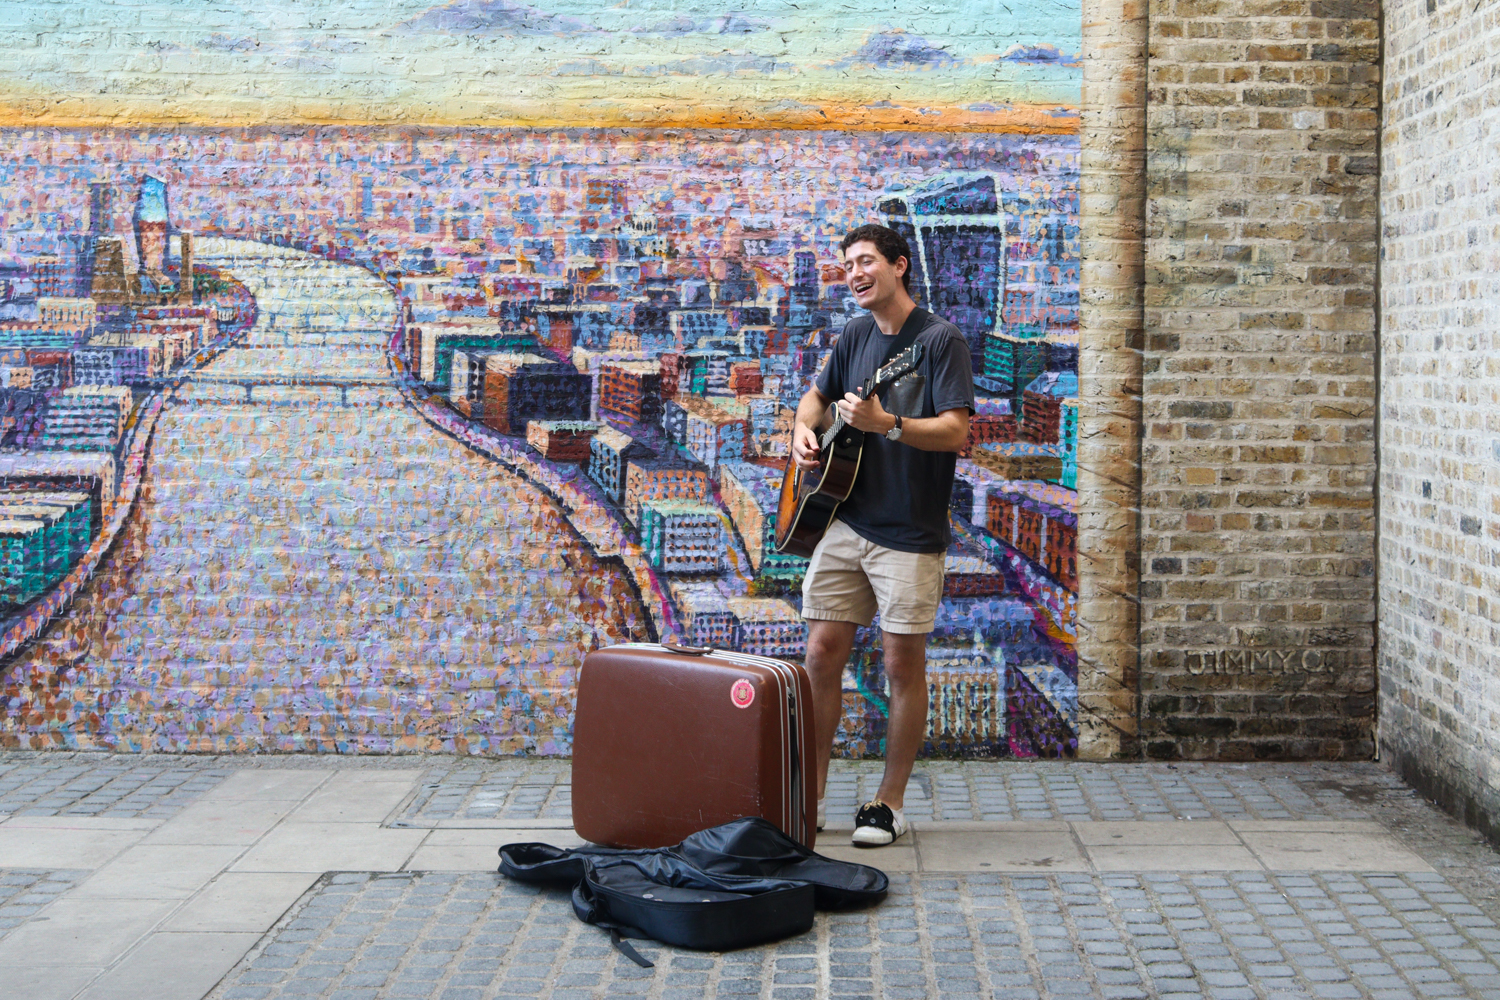 A busker performing in the perfect location as crowds of people pass by, the graffiti art makes the perfect backdrop for his performance.